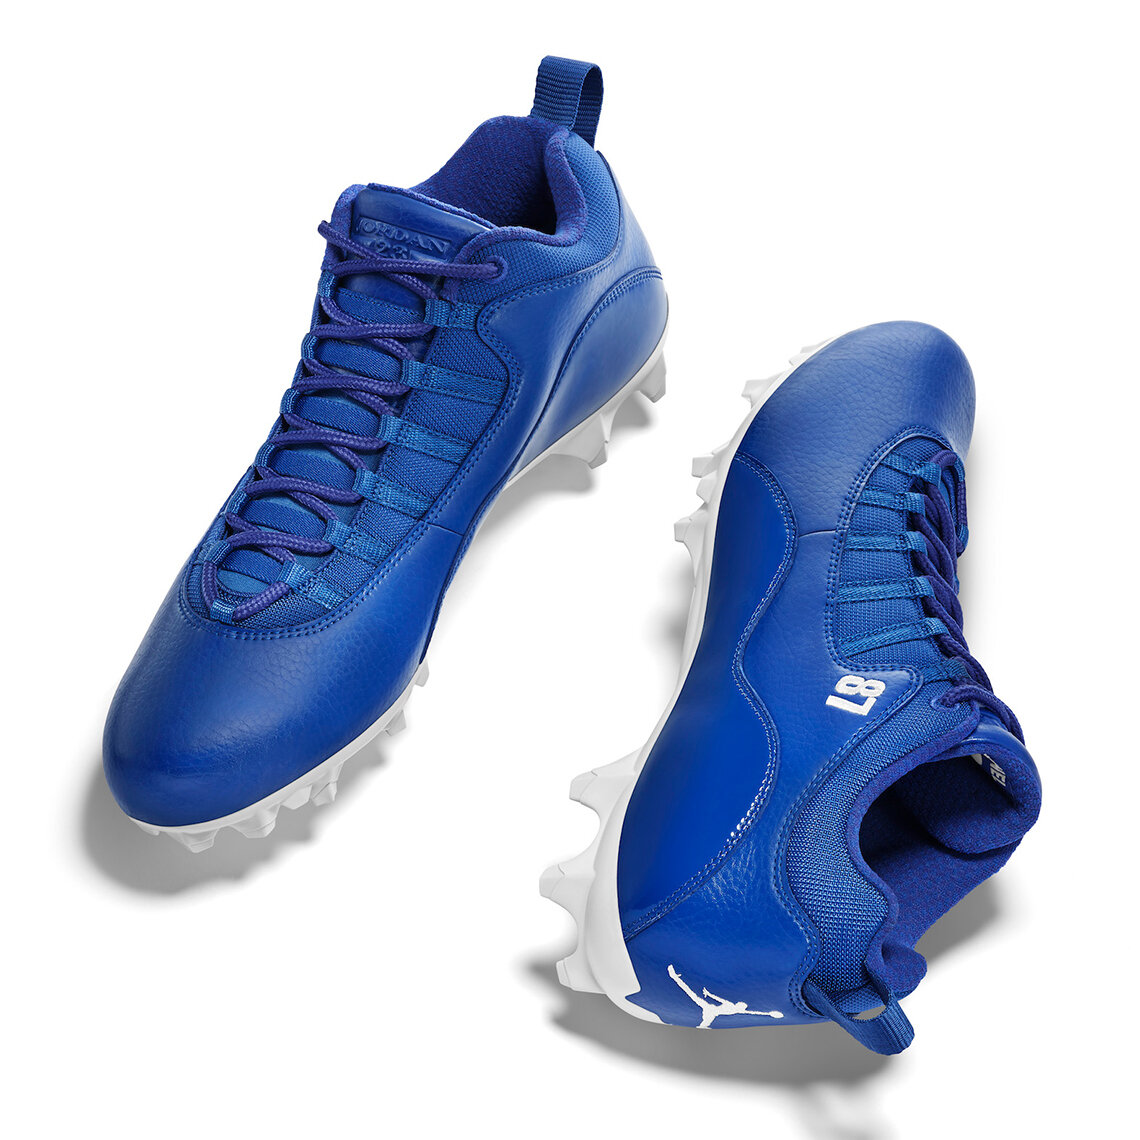 blue and white jordan cleats